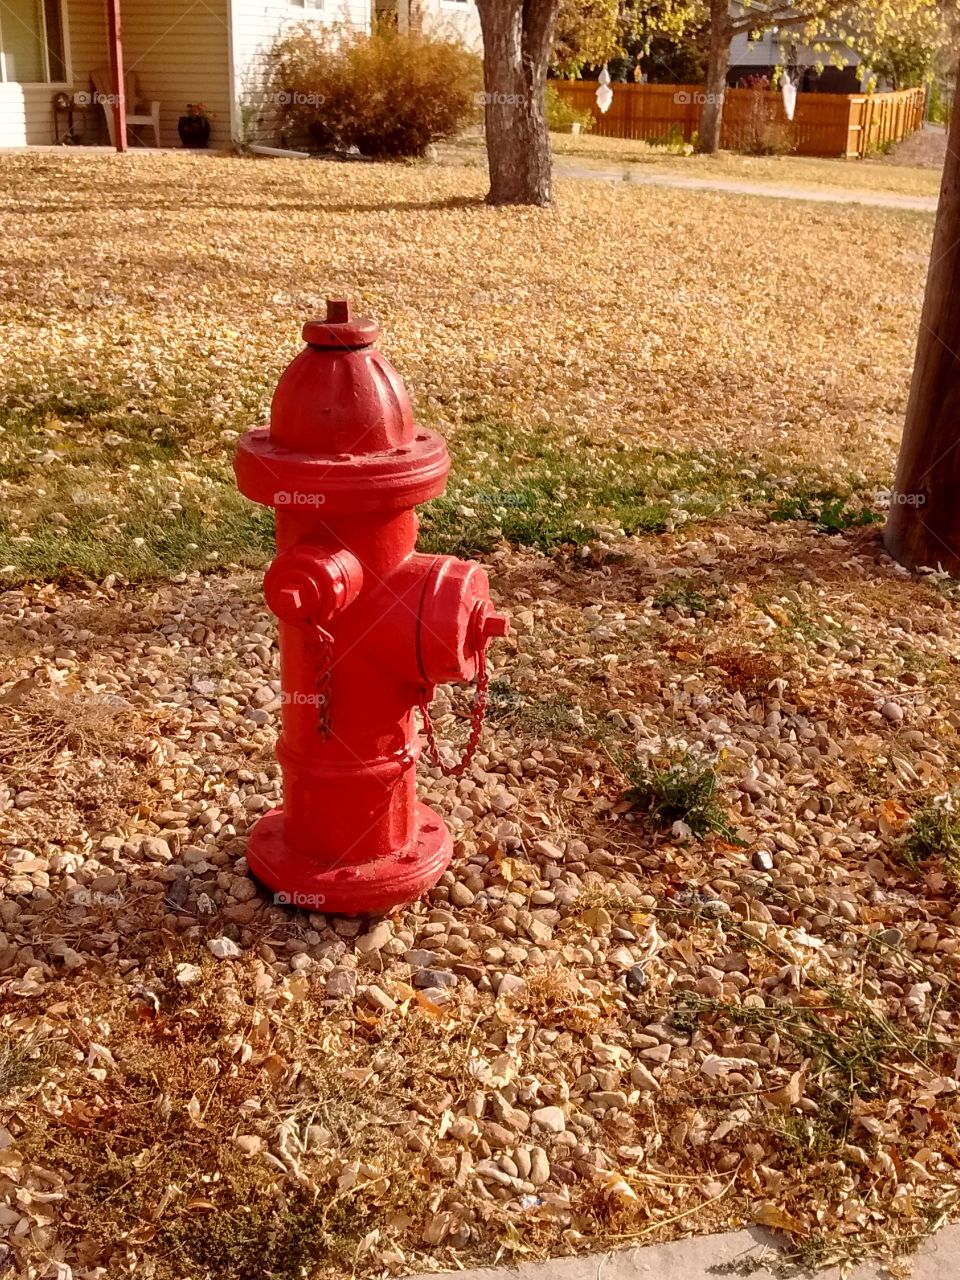 red fire hydrant in yarf